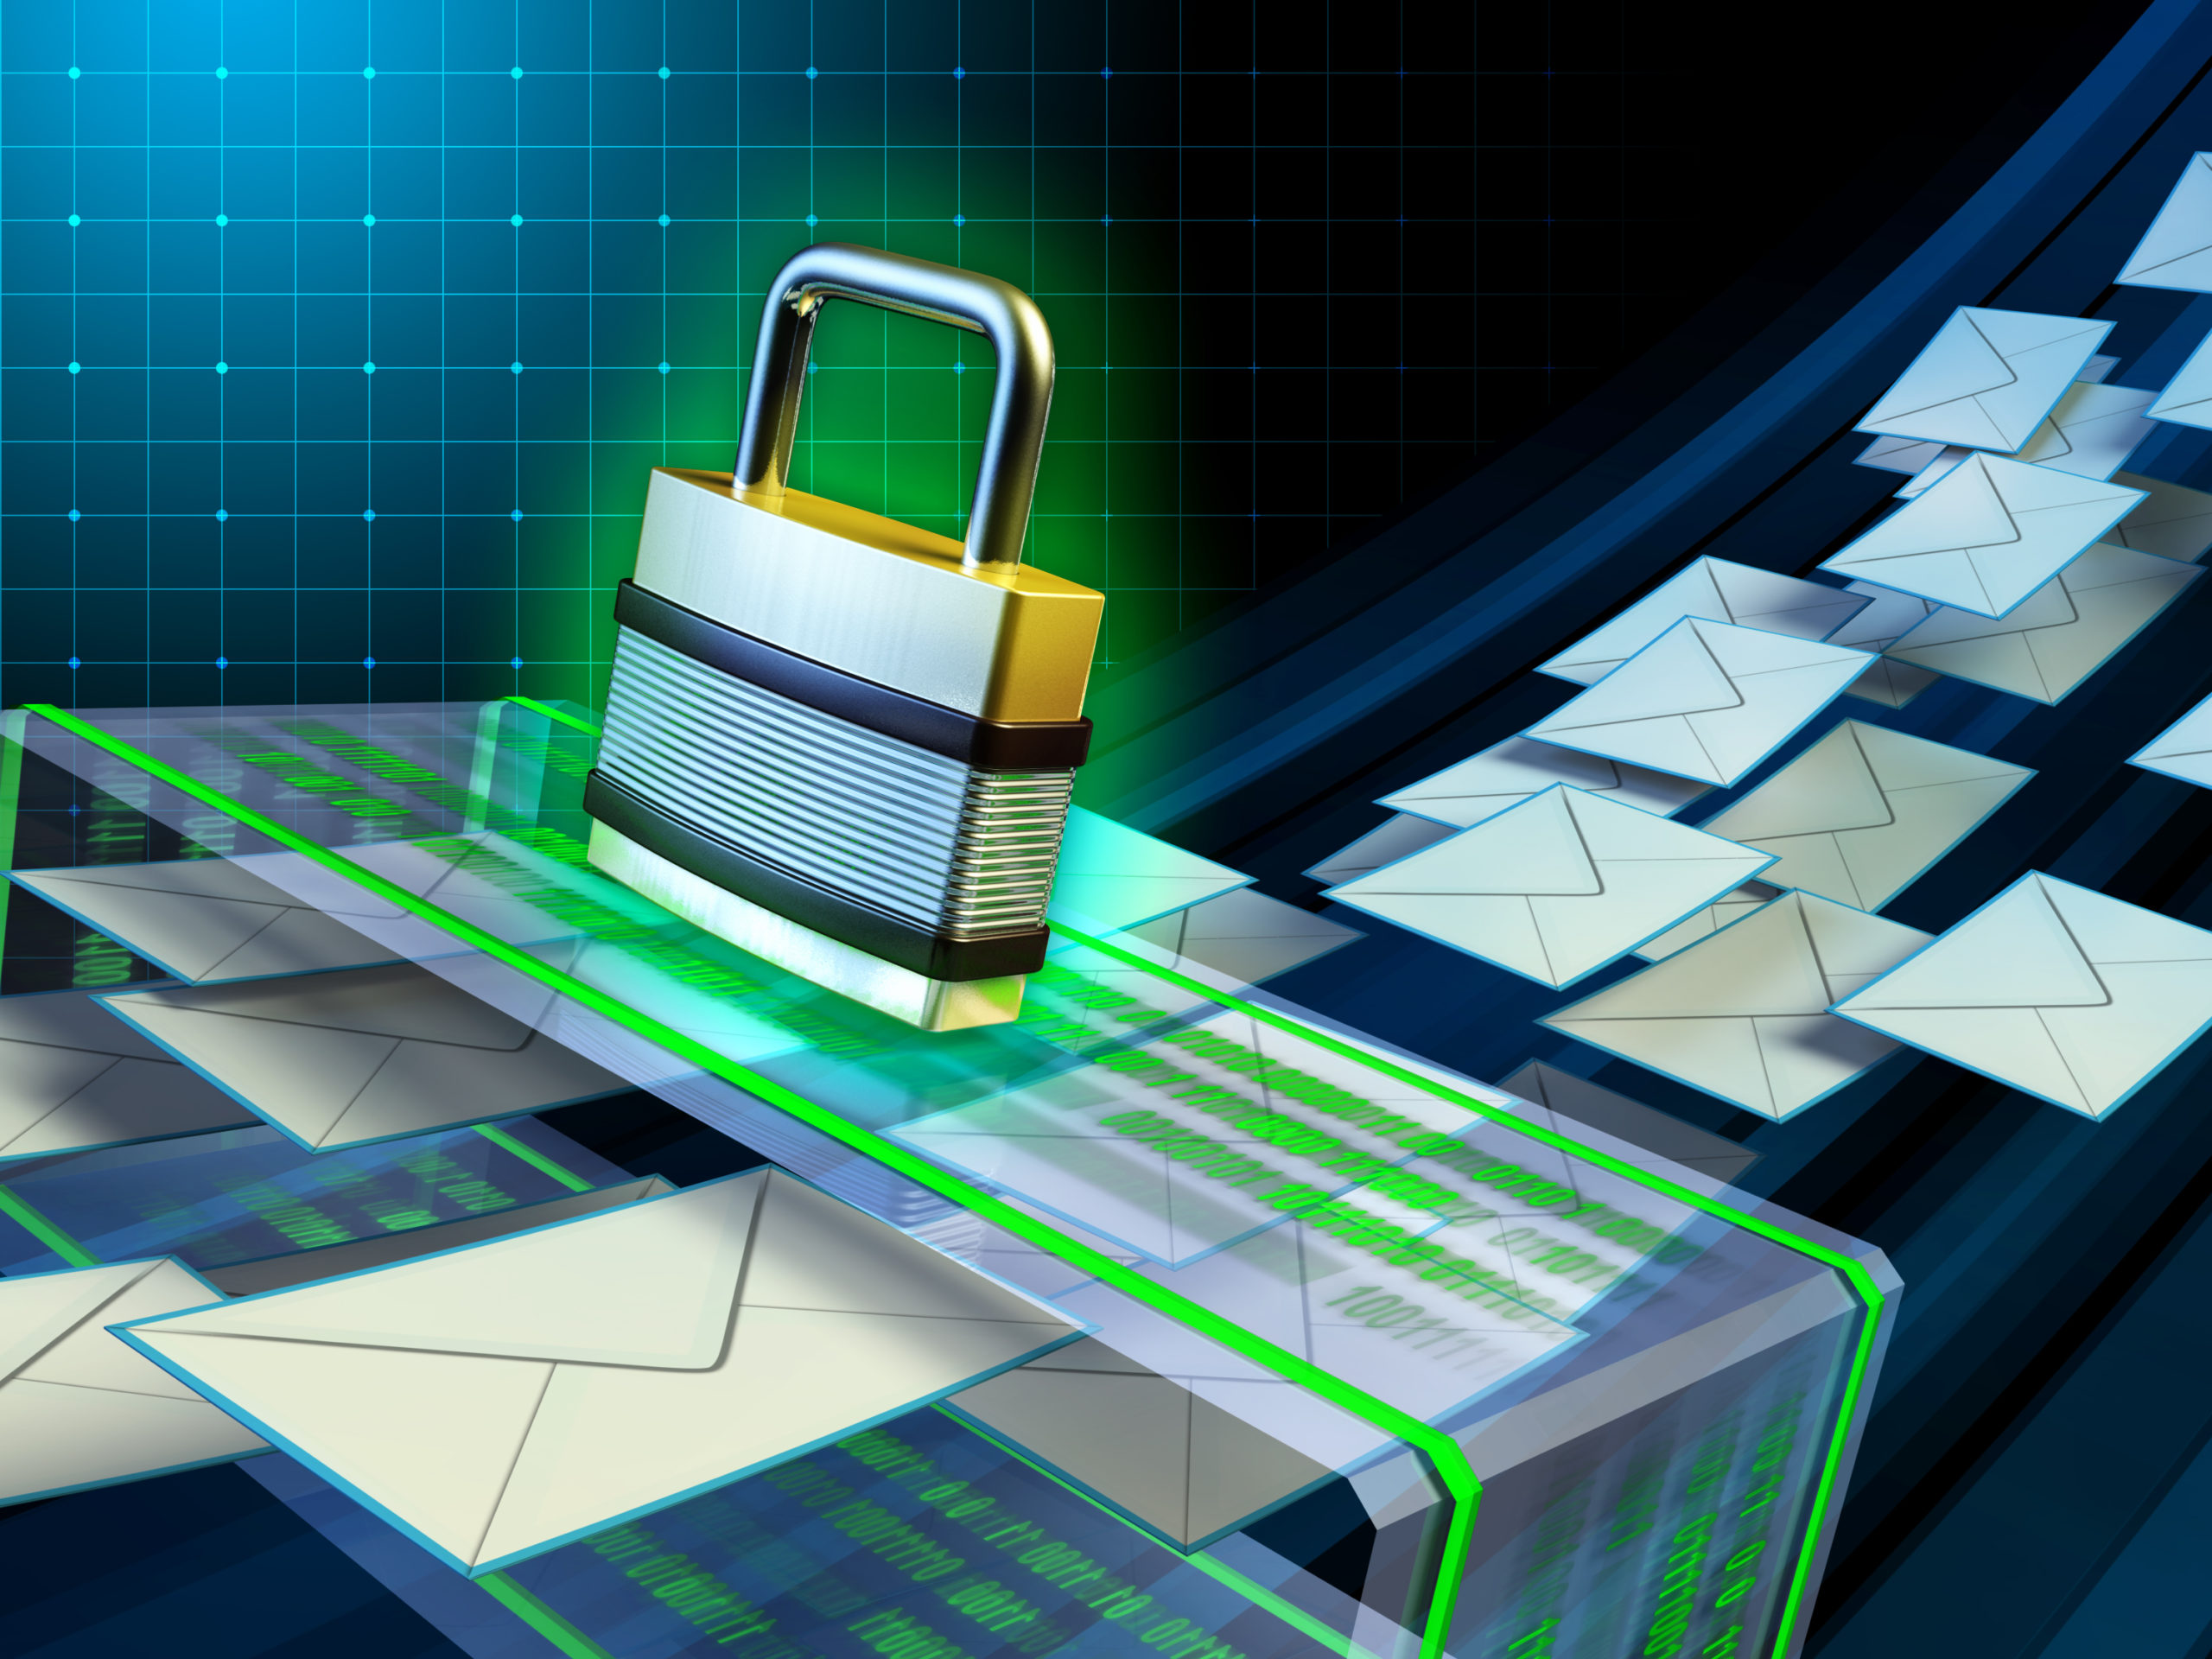 Sealed letter envelopes pass through slot topped with padlock over grid background, illustrating secure email gateway (SEG).